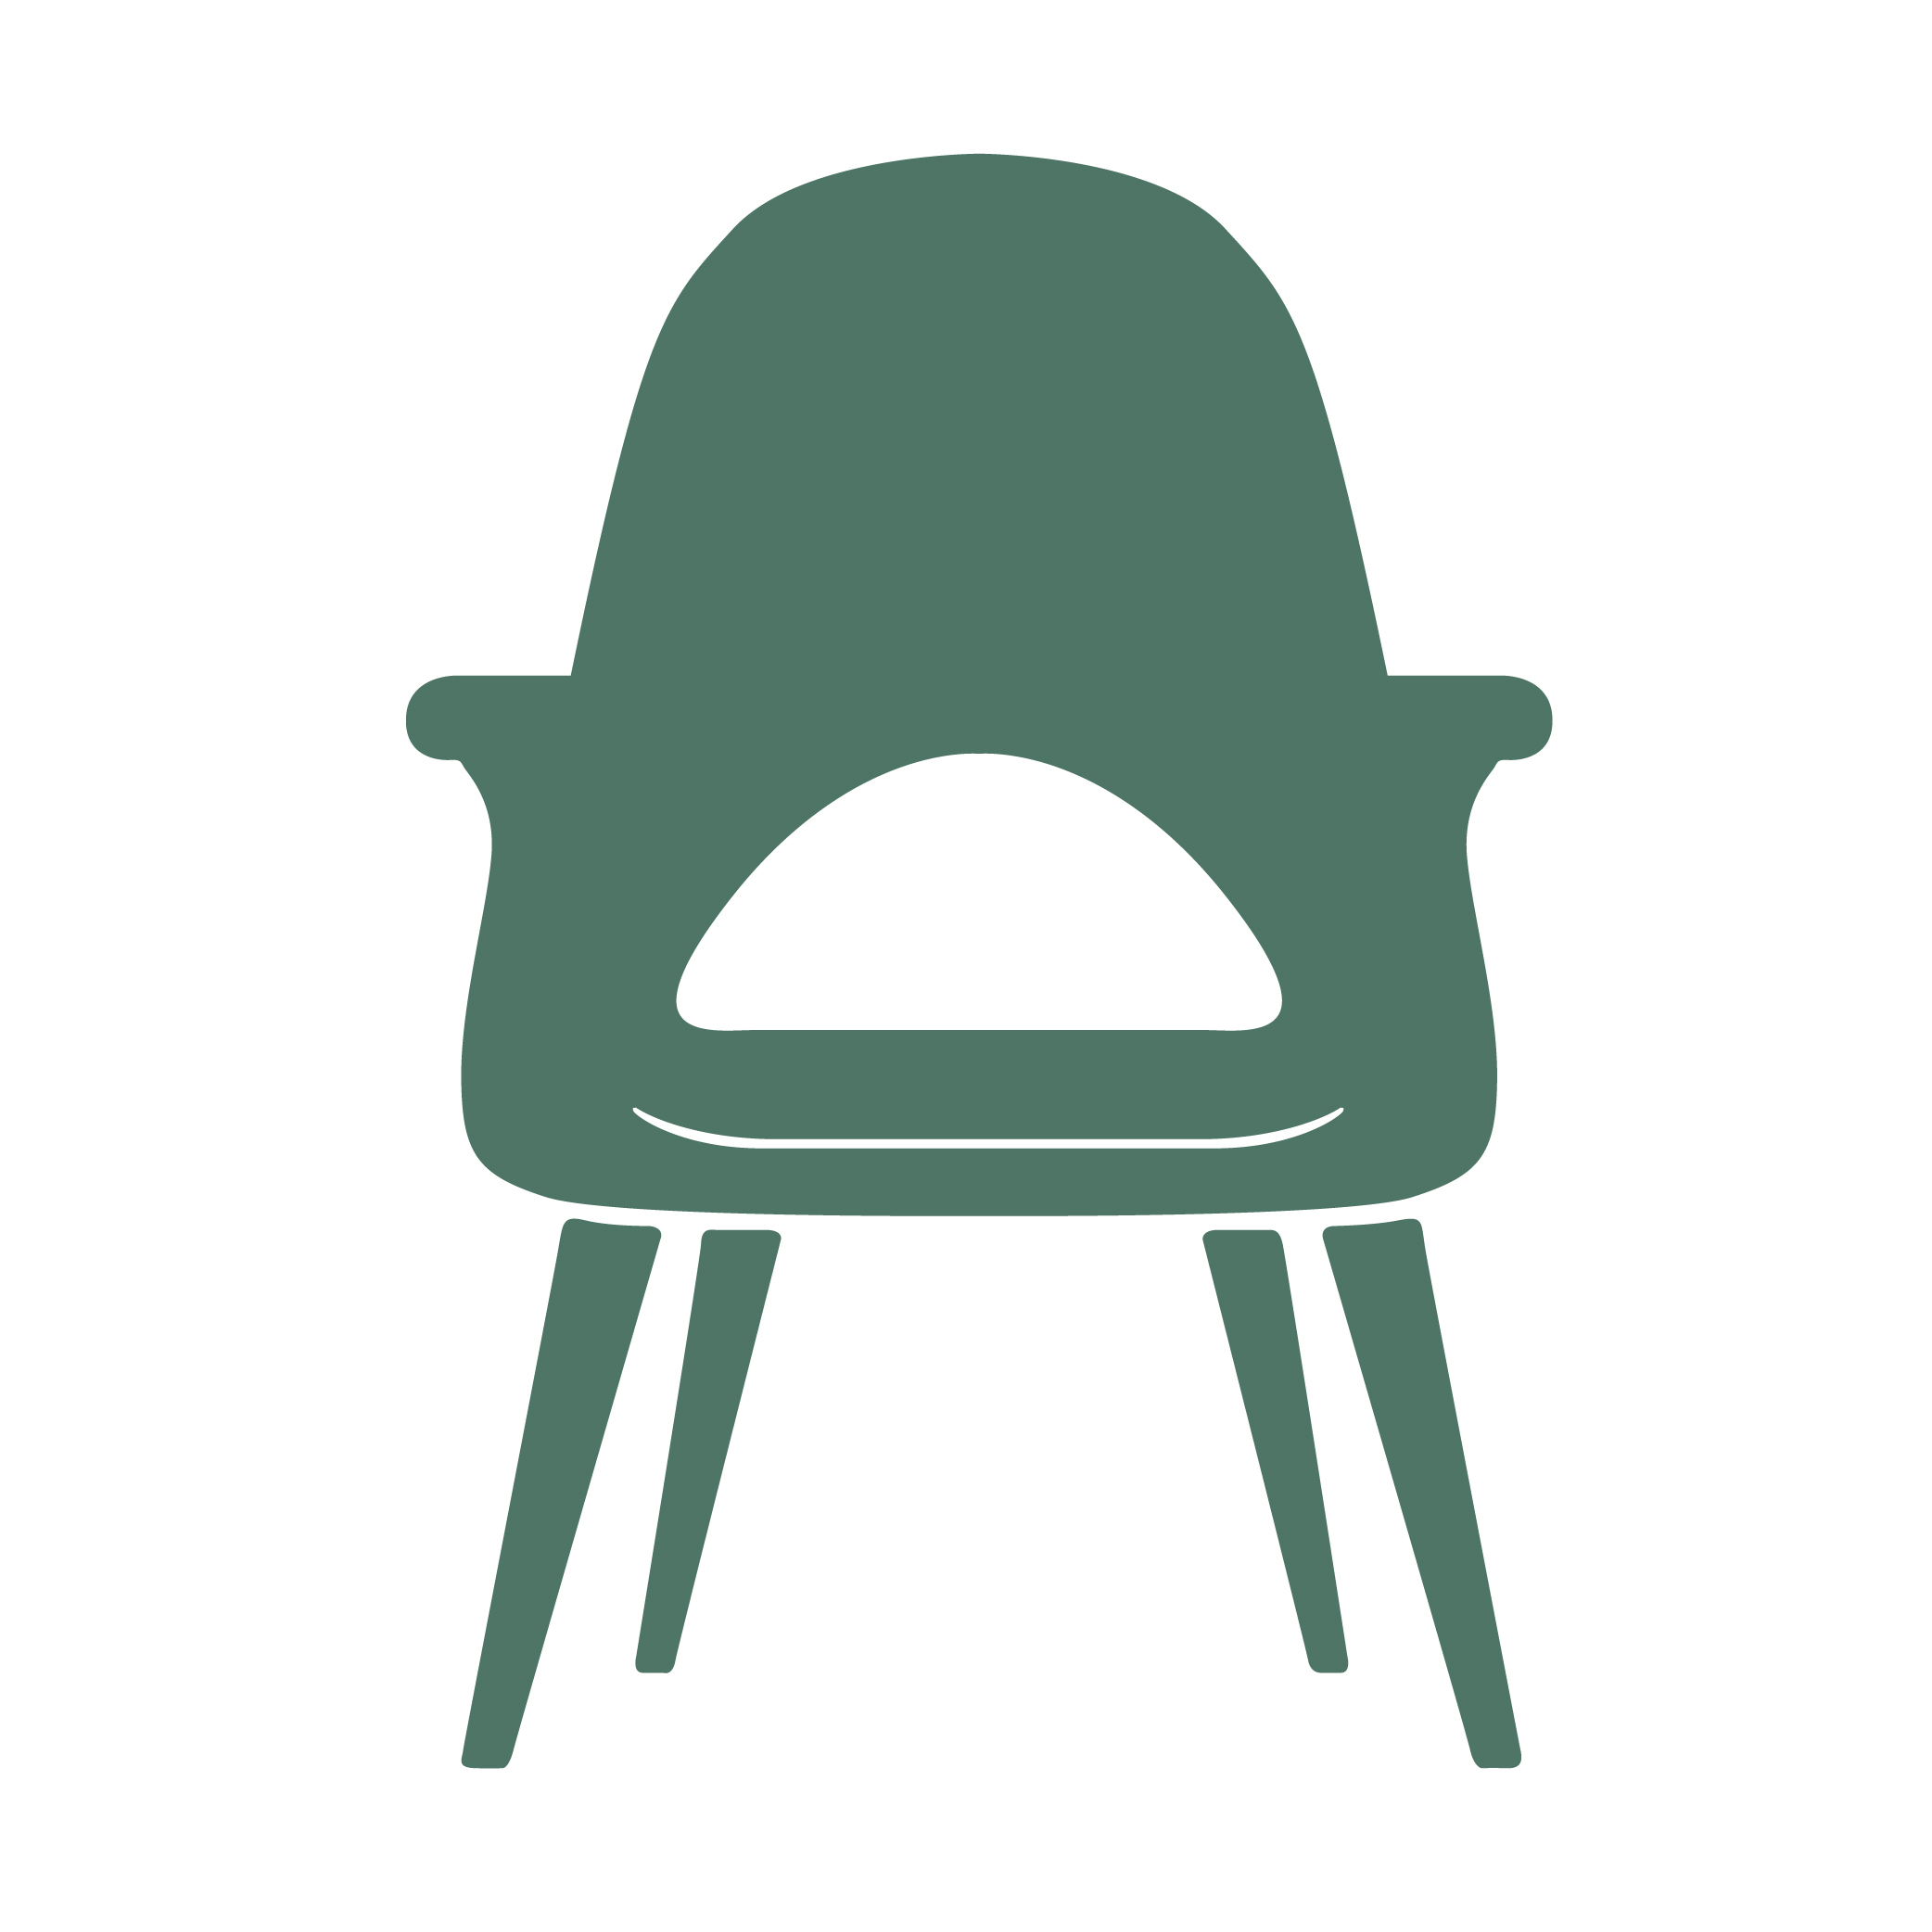 Galway High Stool